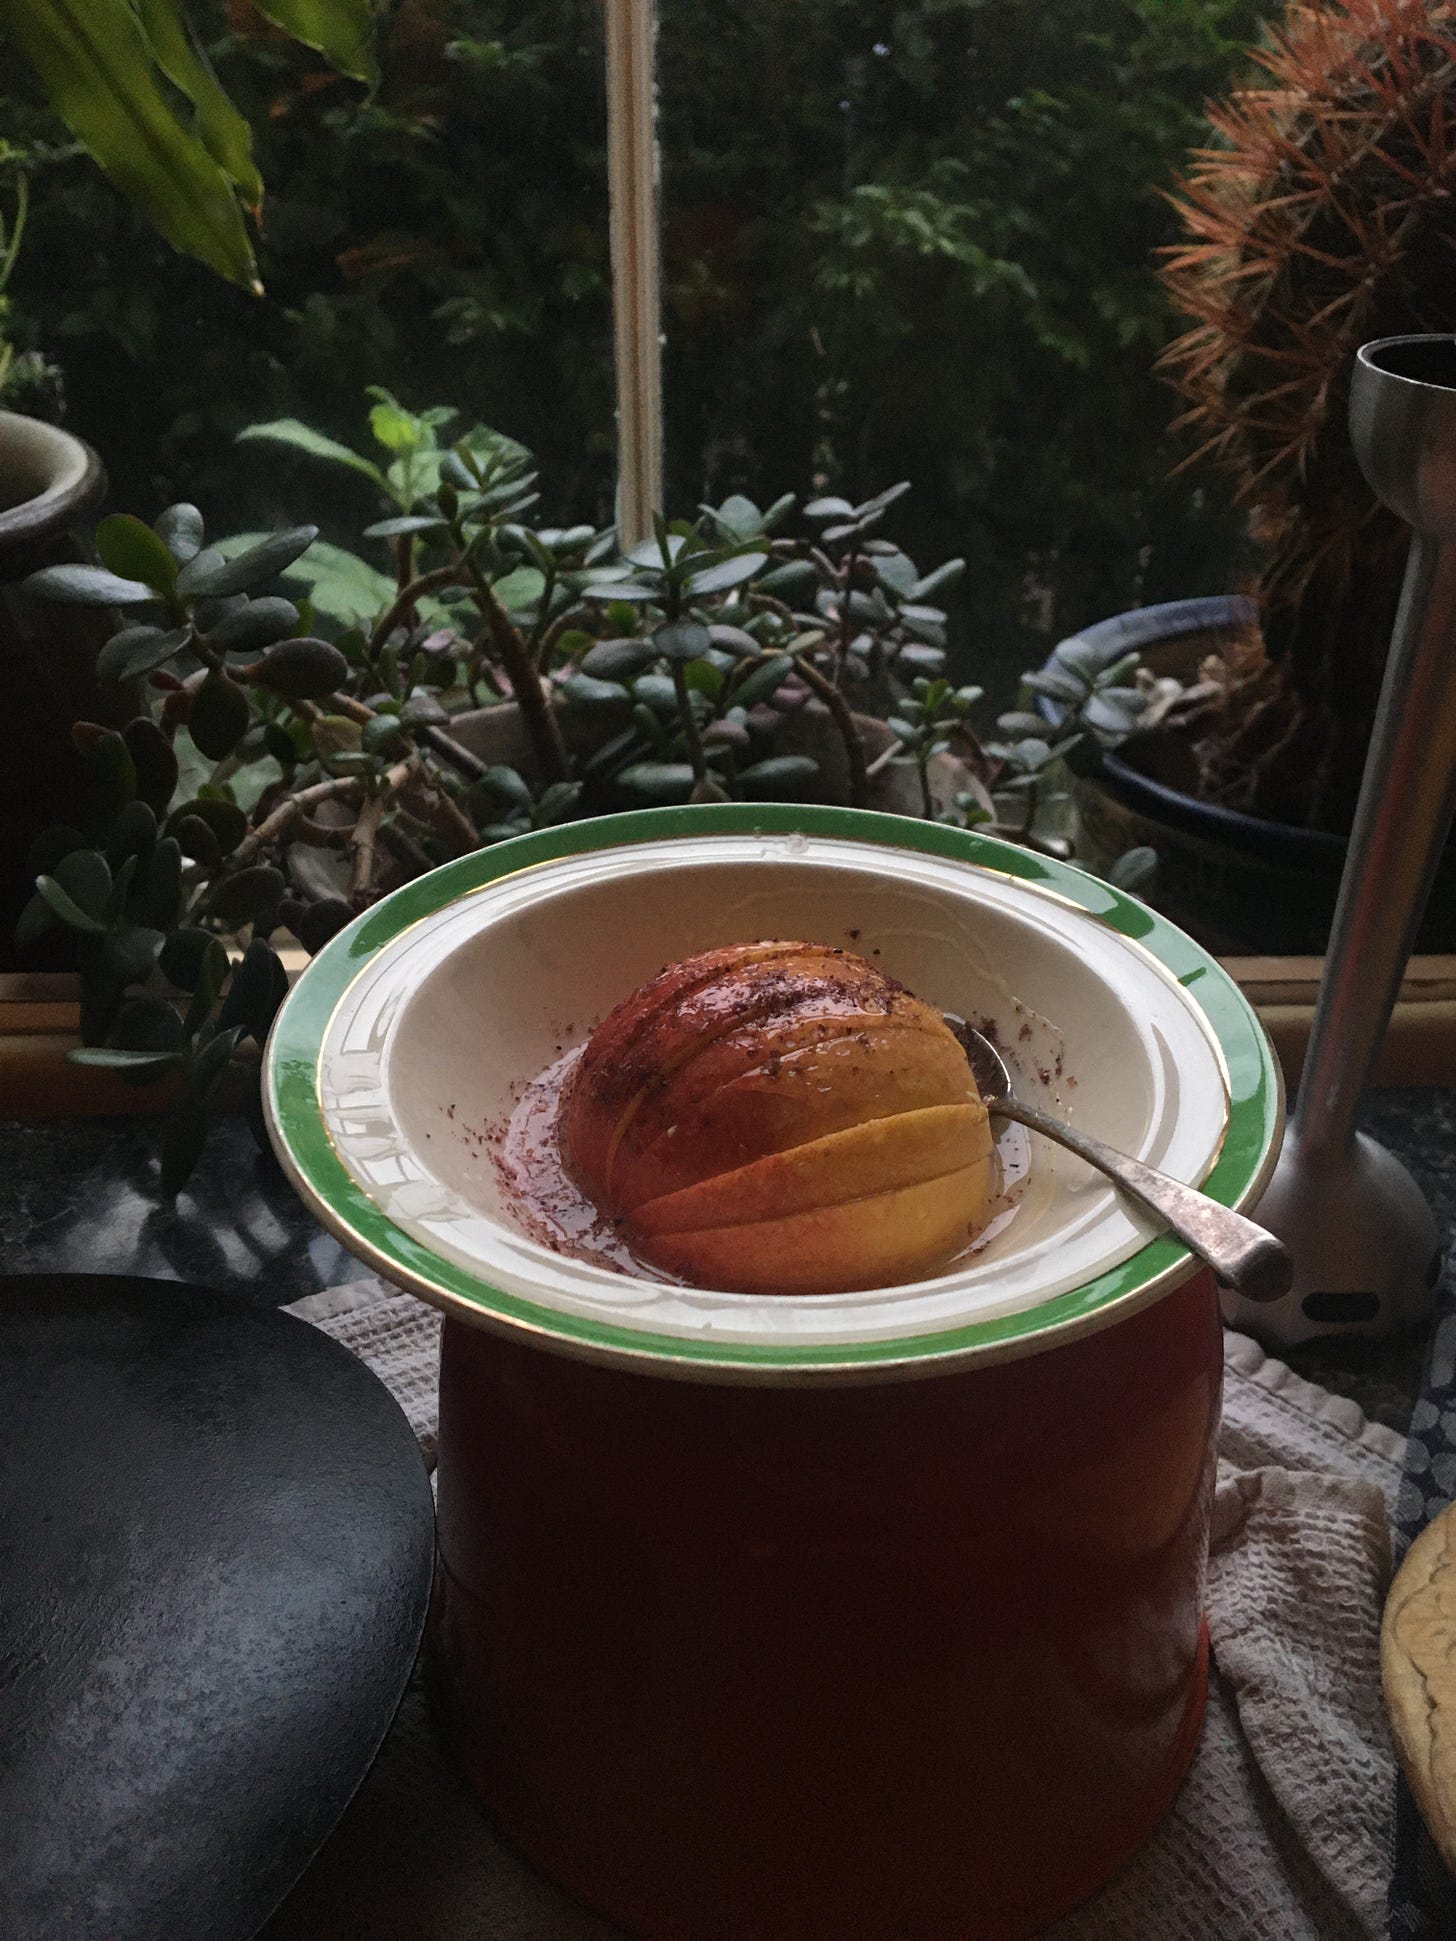 A photo from the side of a small saucer with half a sliced nectarine neatly sitting in it. The bowl is cream with a bright green and gold rim. Atop is a dark pink powder, sumac/somaq, some liquid, and a small teaspoon alongside. It is dusk, the light’s fading, and in the background and blurry, there is a big red-spiked cacti and a jade plant in front of a window. 